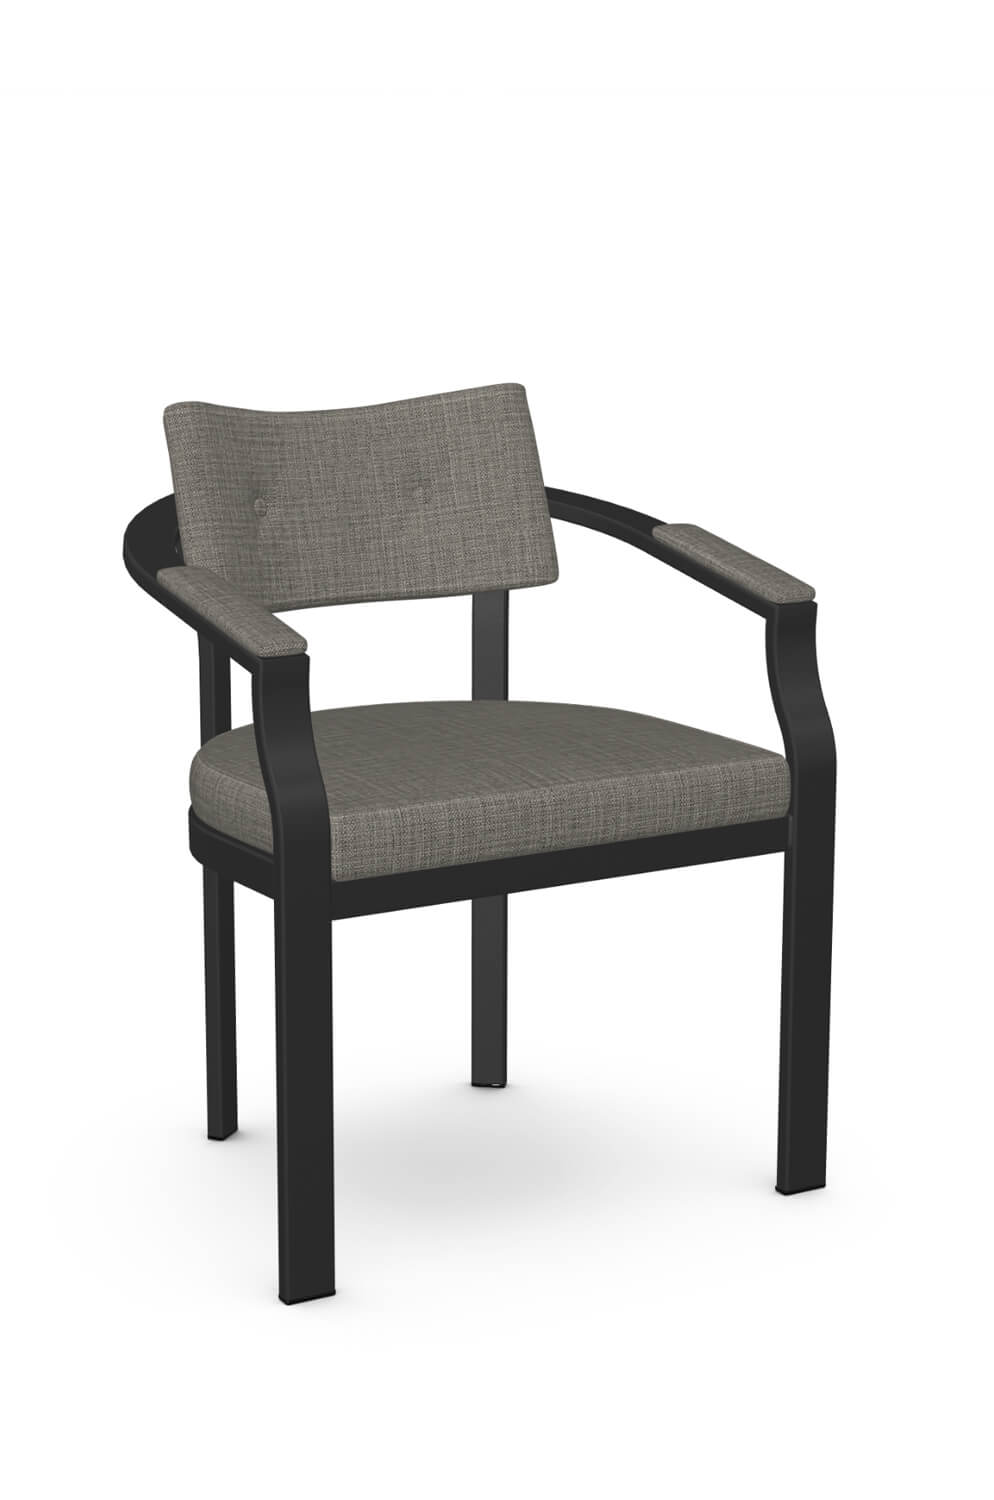 Round Back Dining Chairs With Arms - Abdabs Furniture - Shiro Accent